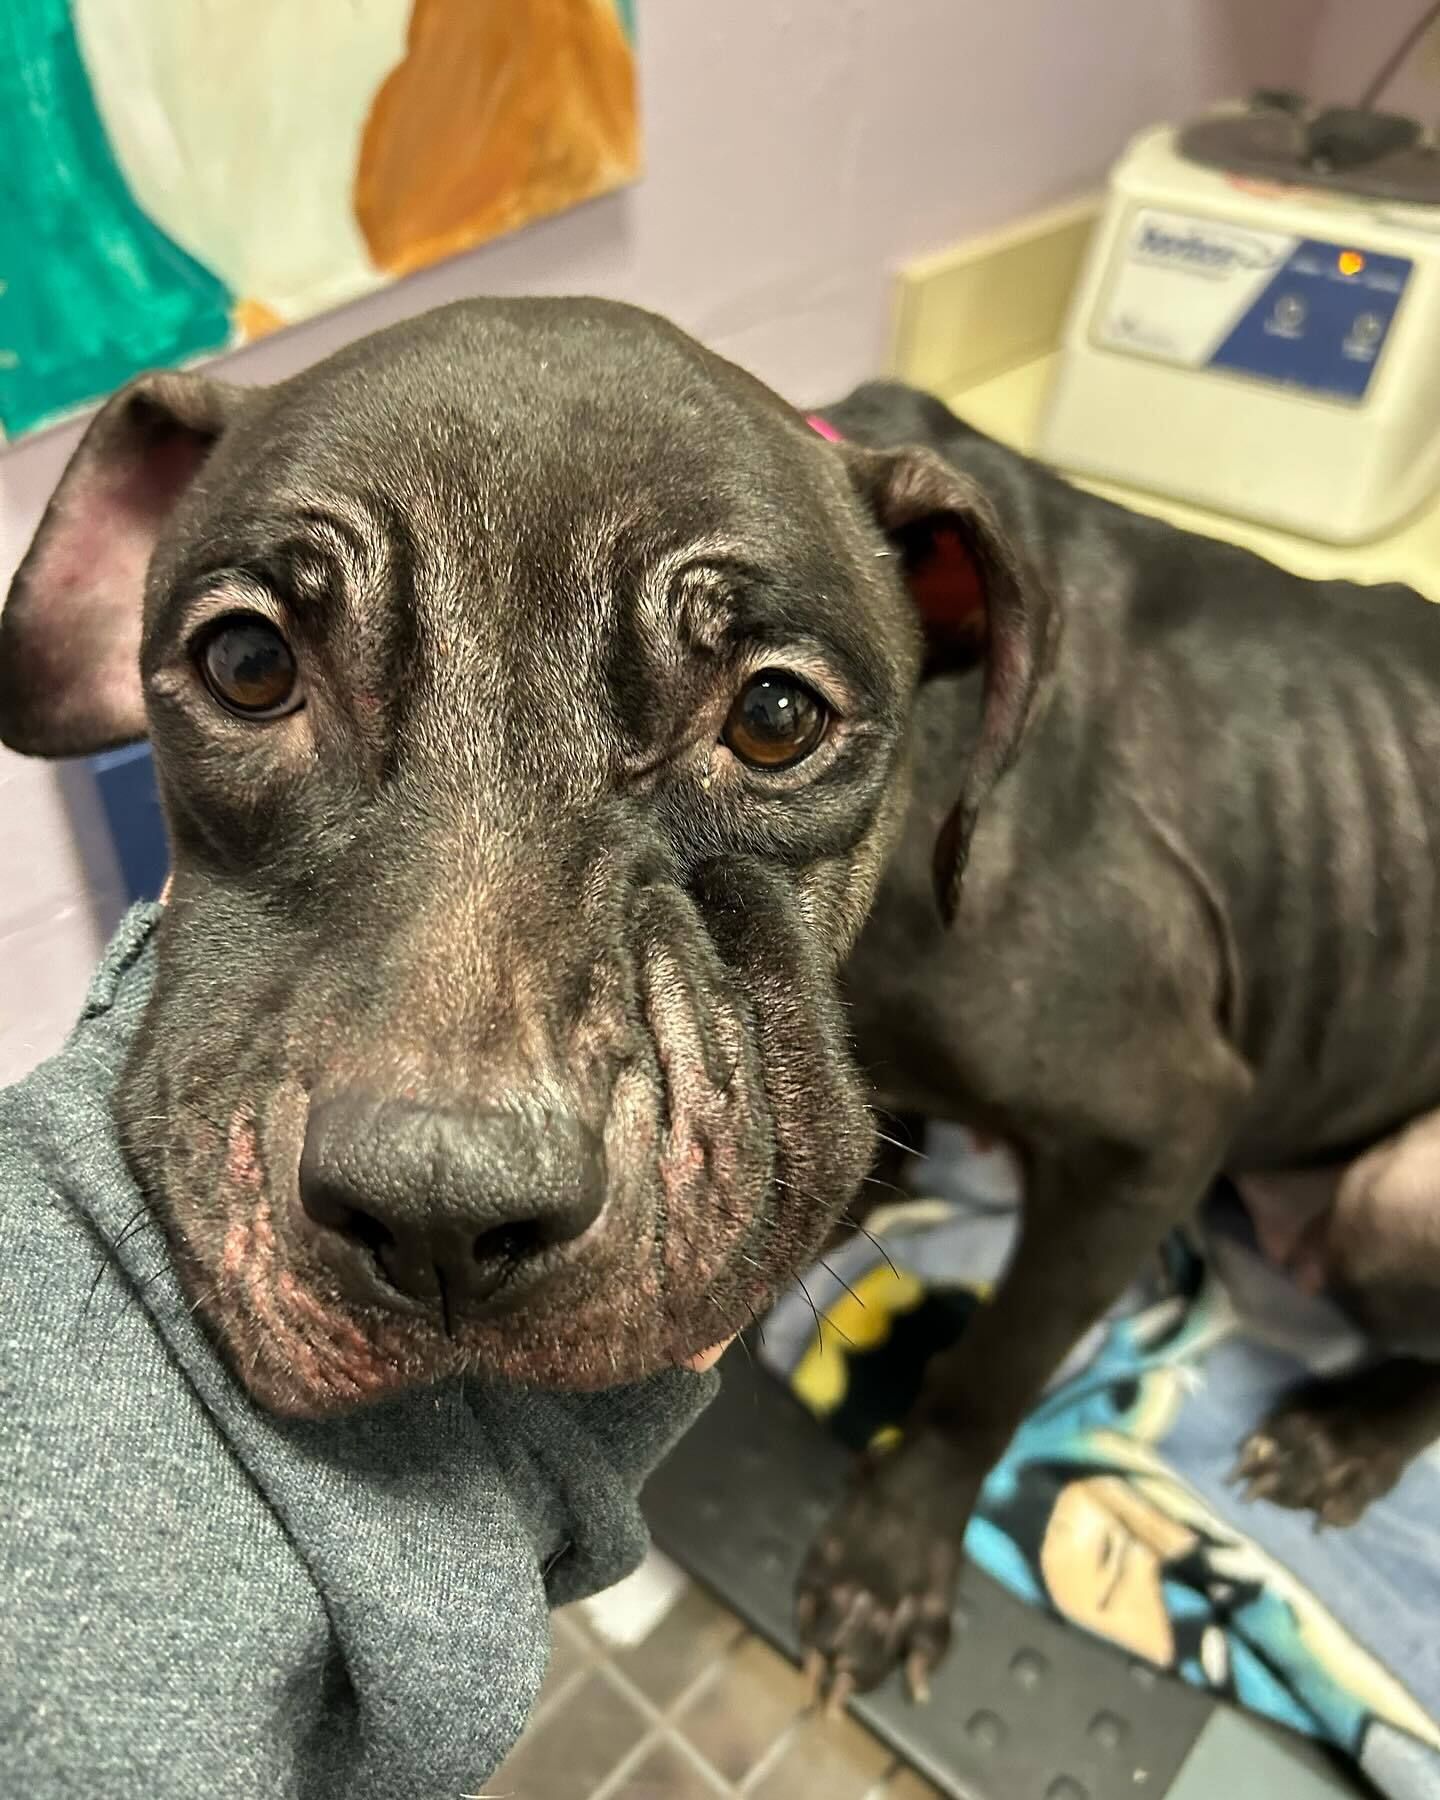 Ophelia the dog now recovering after being found emaciated in the North Jersey cold (NorthJersey.com)